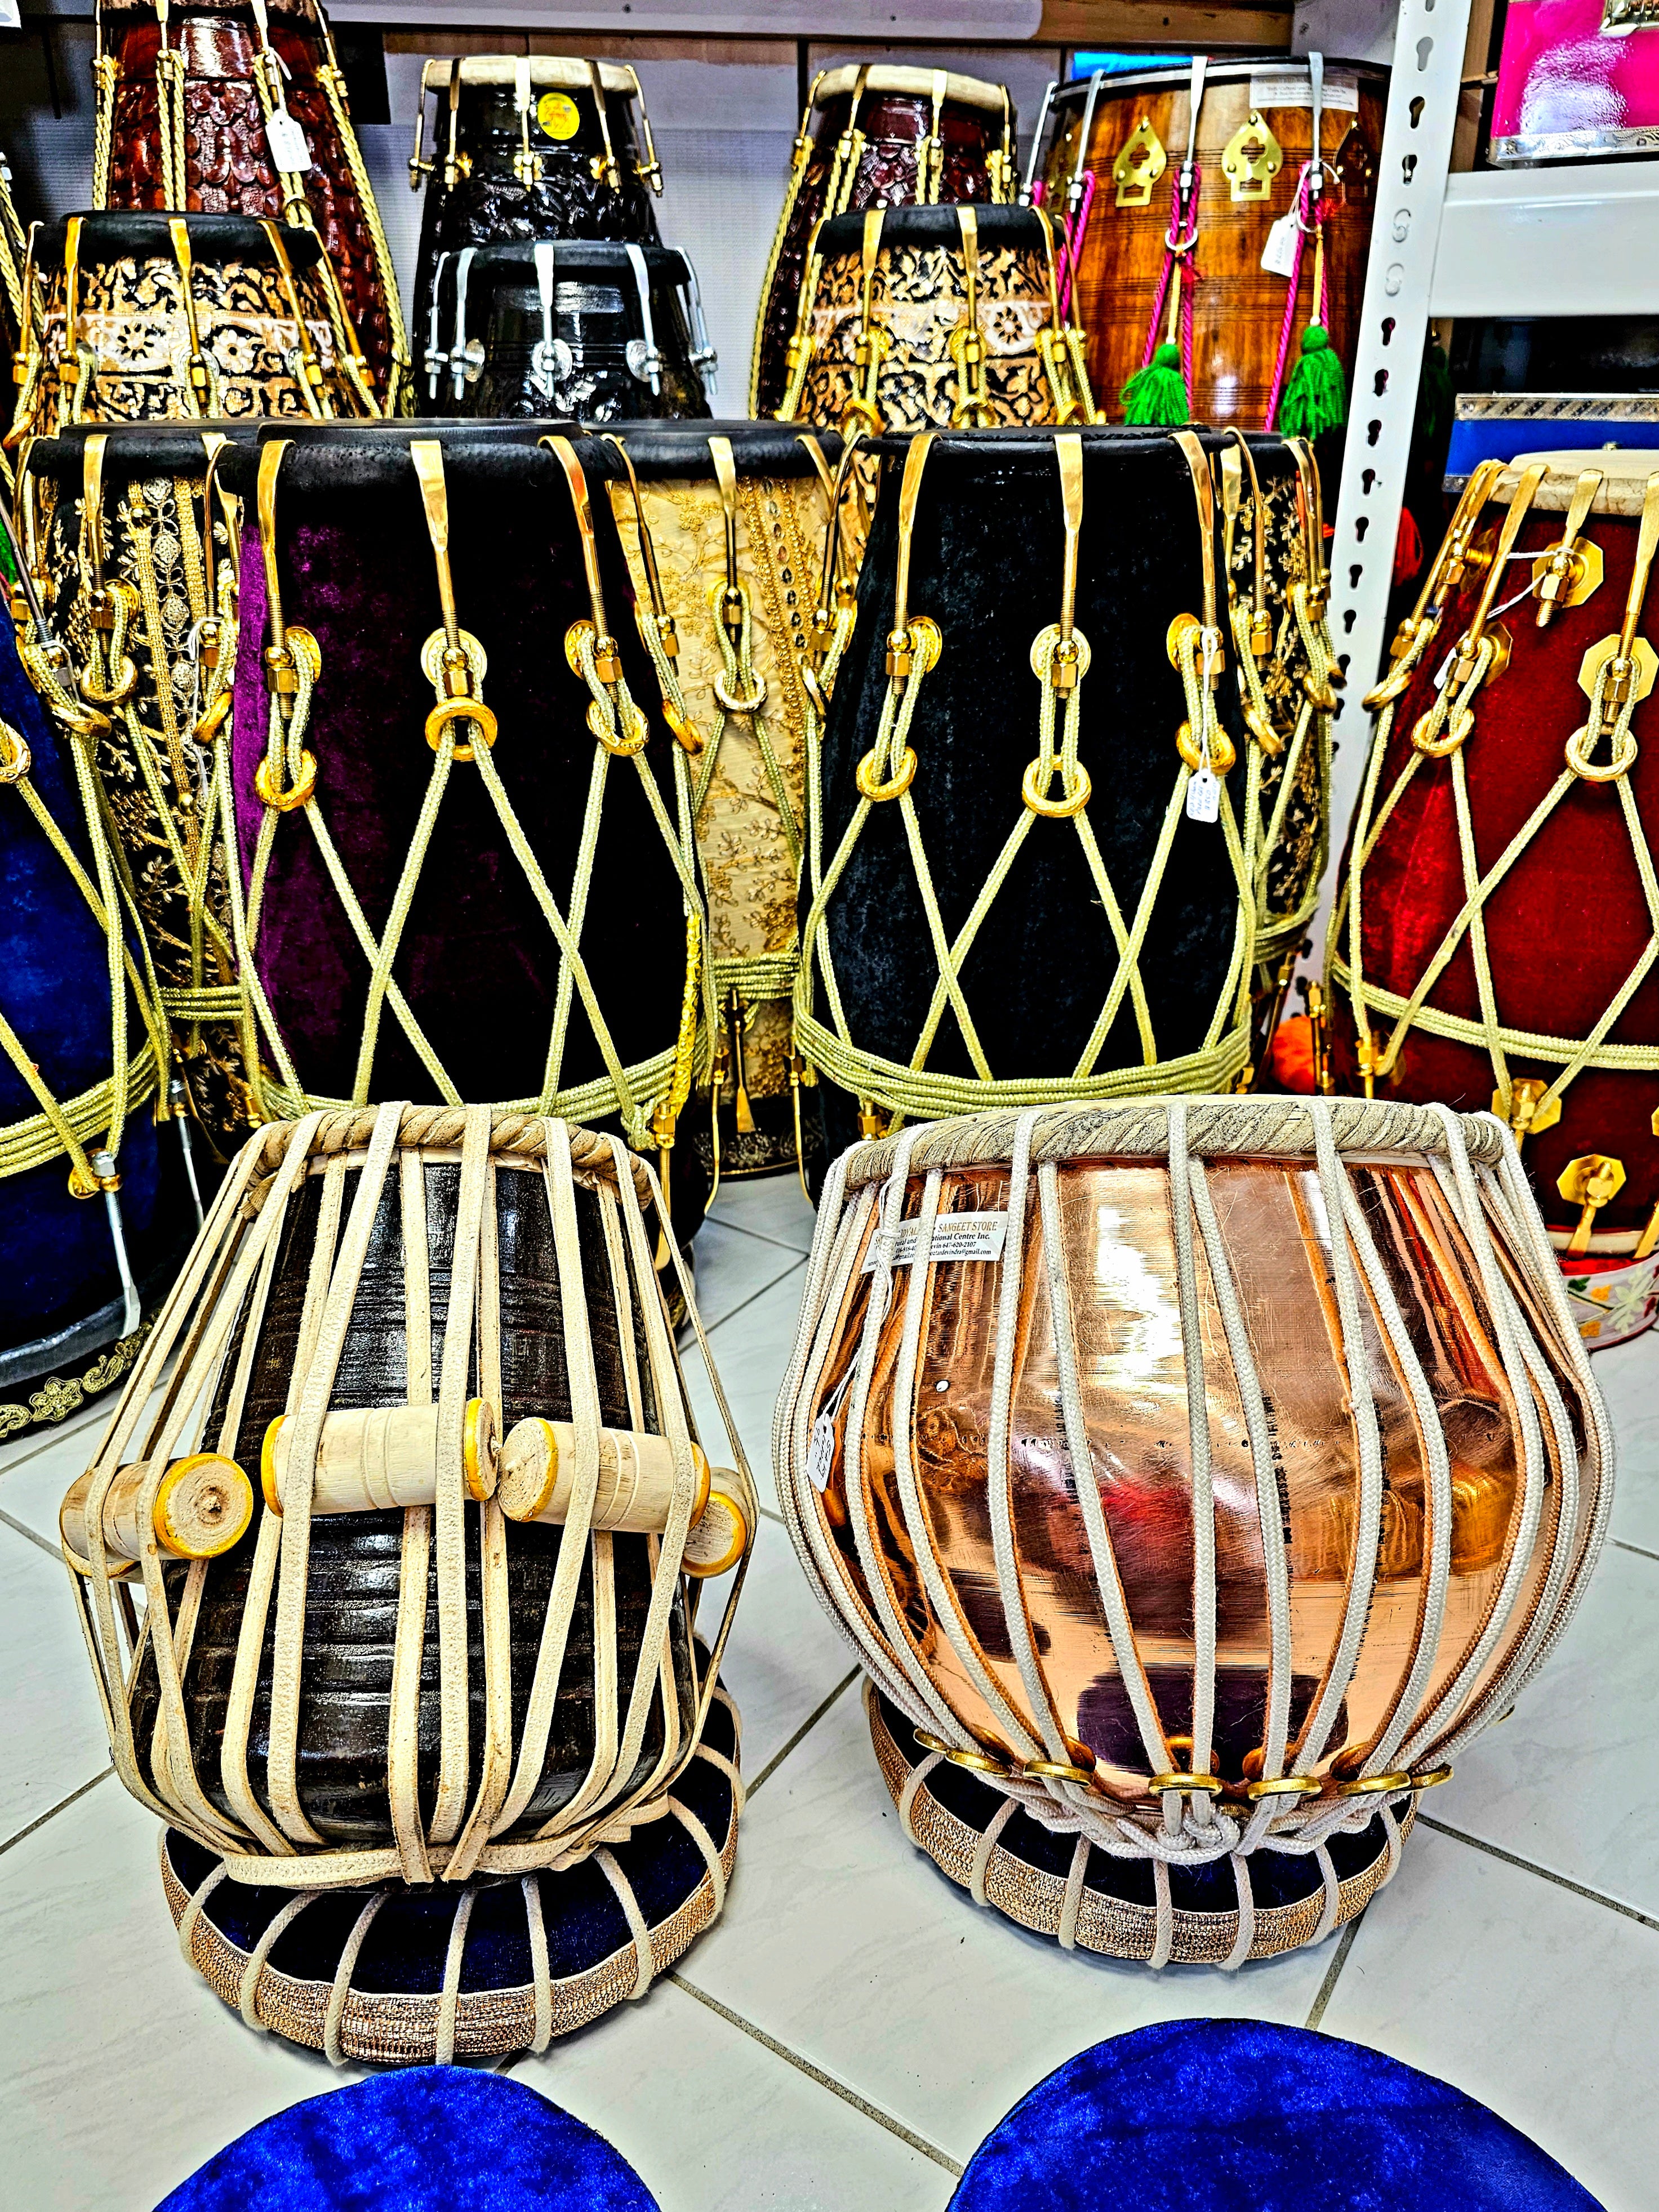 Earthy Vibes: 5.5" Khair Wood Dayan *With Slight Buzz* + 9.5" 5.4kg Copper Traditional Roped Bayan *With Minor External Chips* Tabla Set